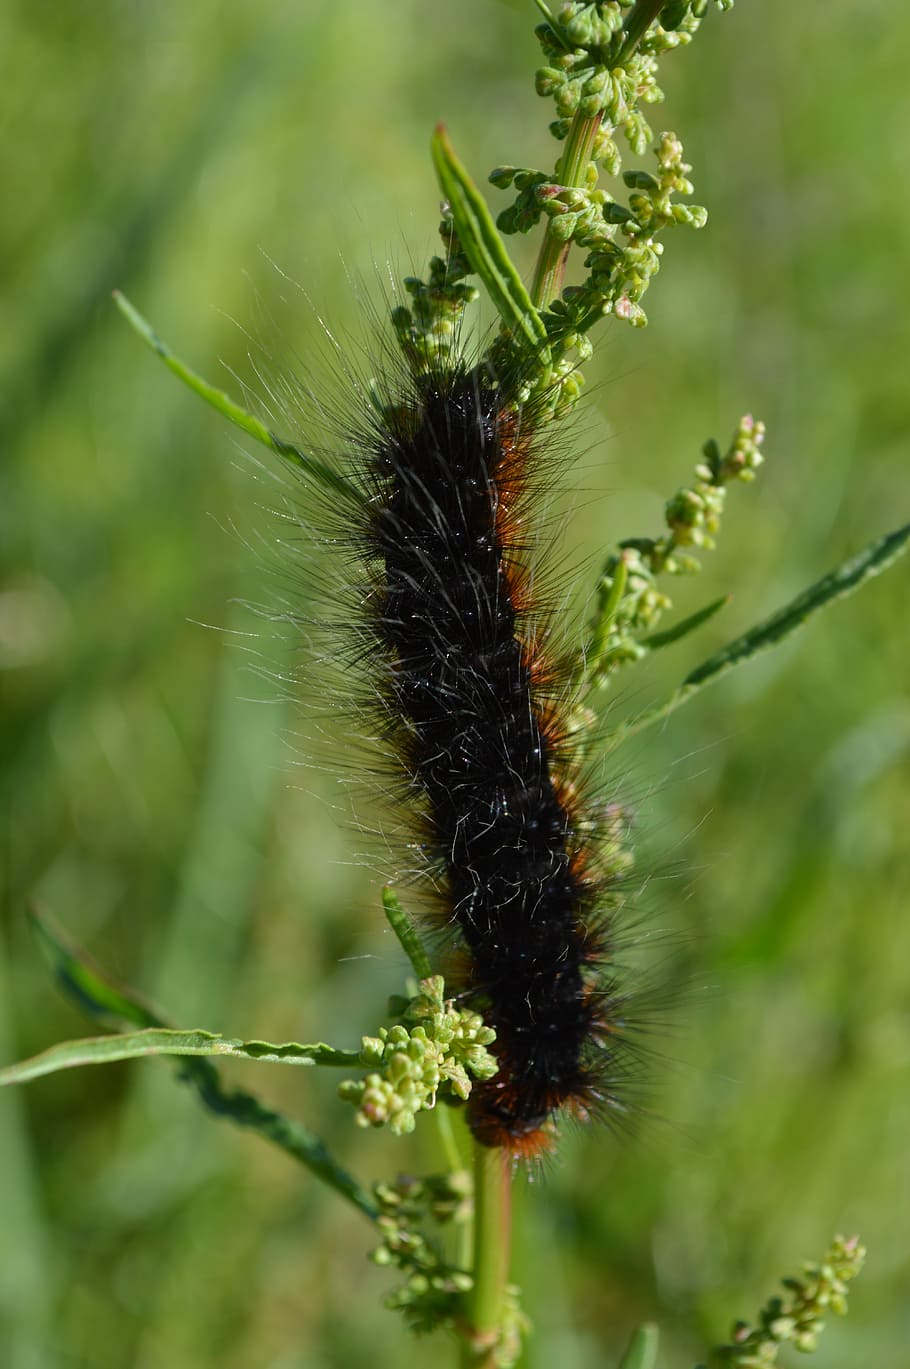 big dipper, caterpillar, butterfly, bug, nature reserve, nature, hairy, fluffy, close up, plant